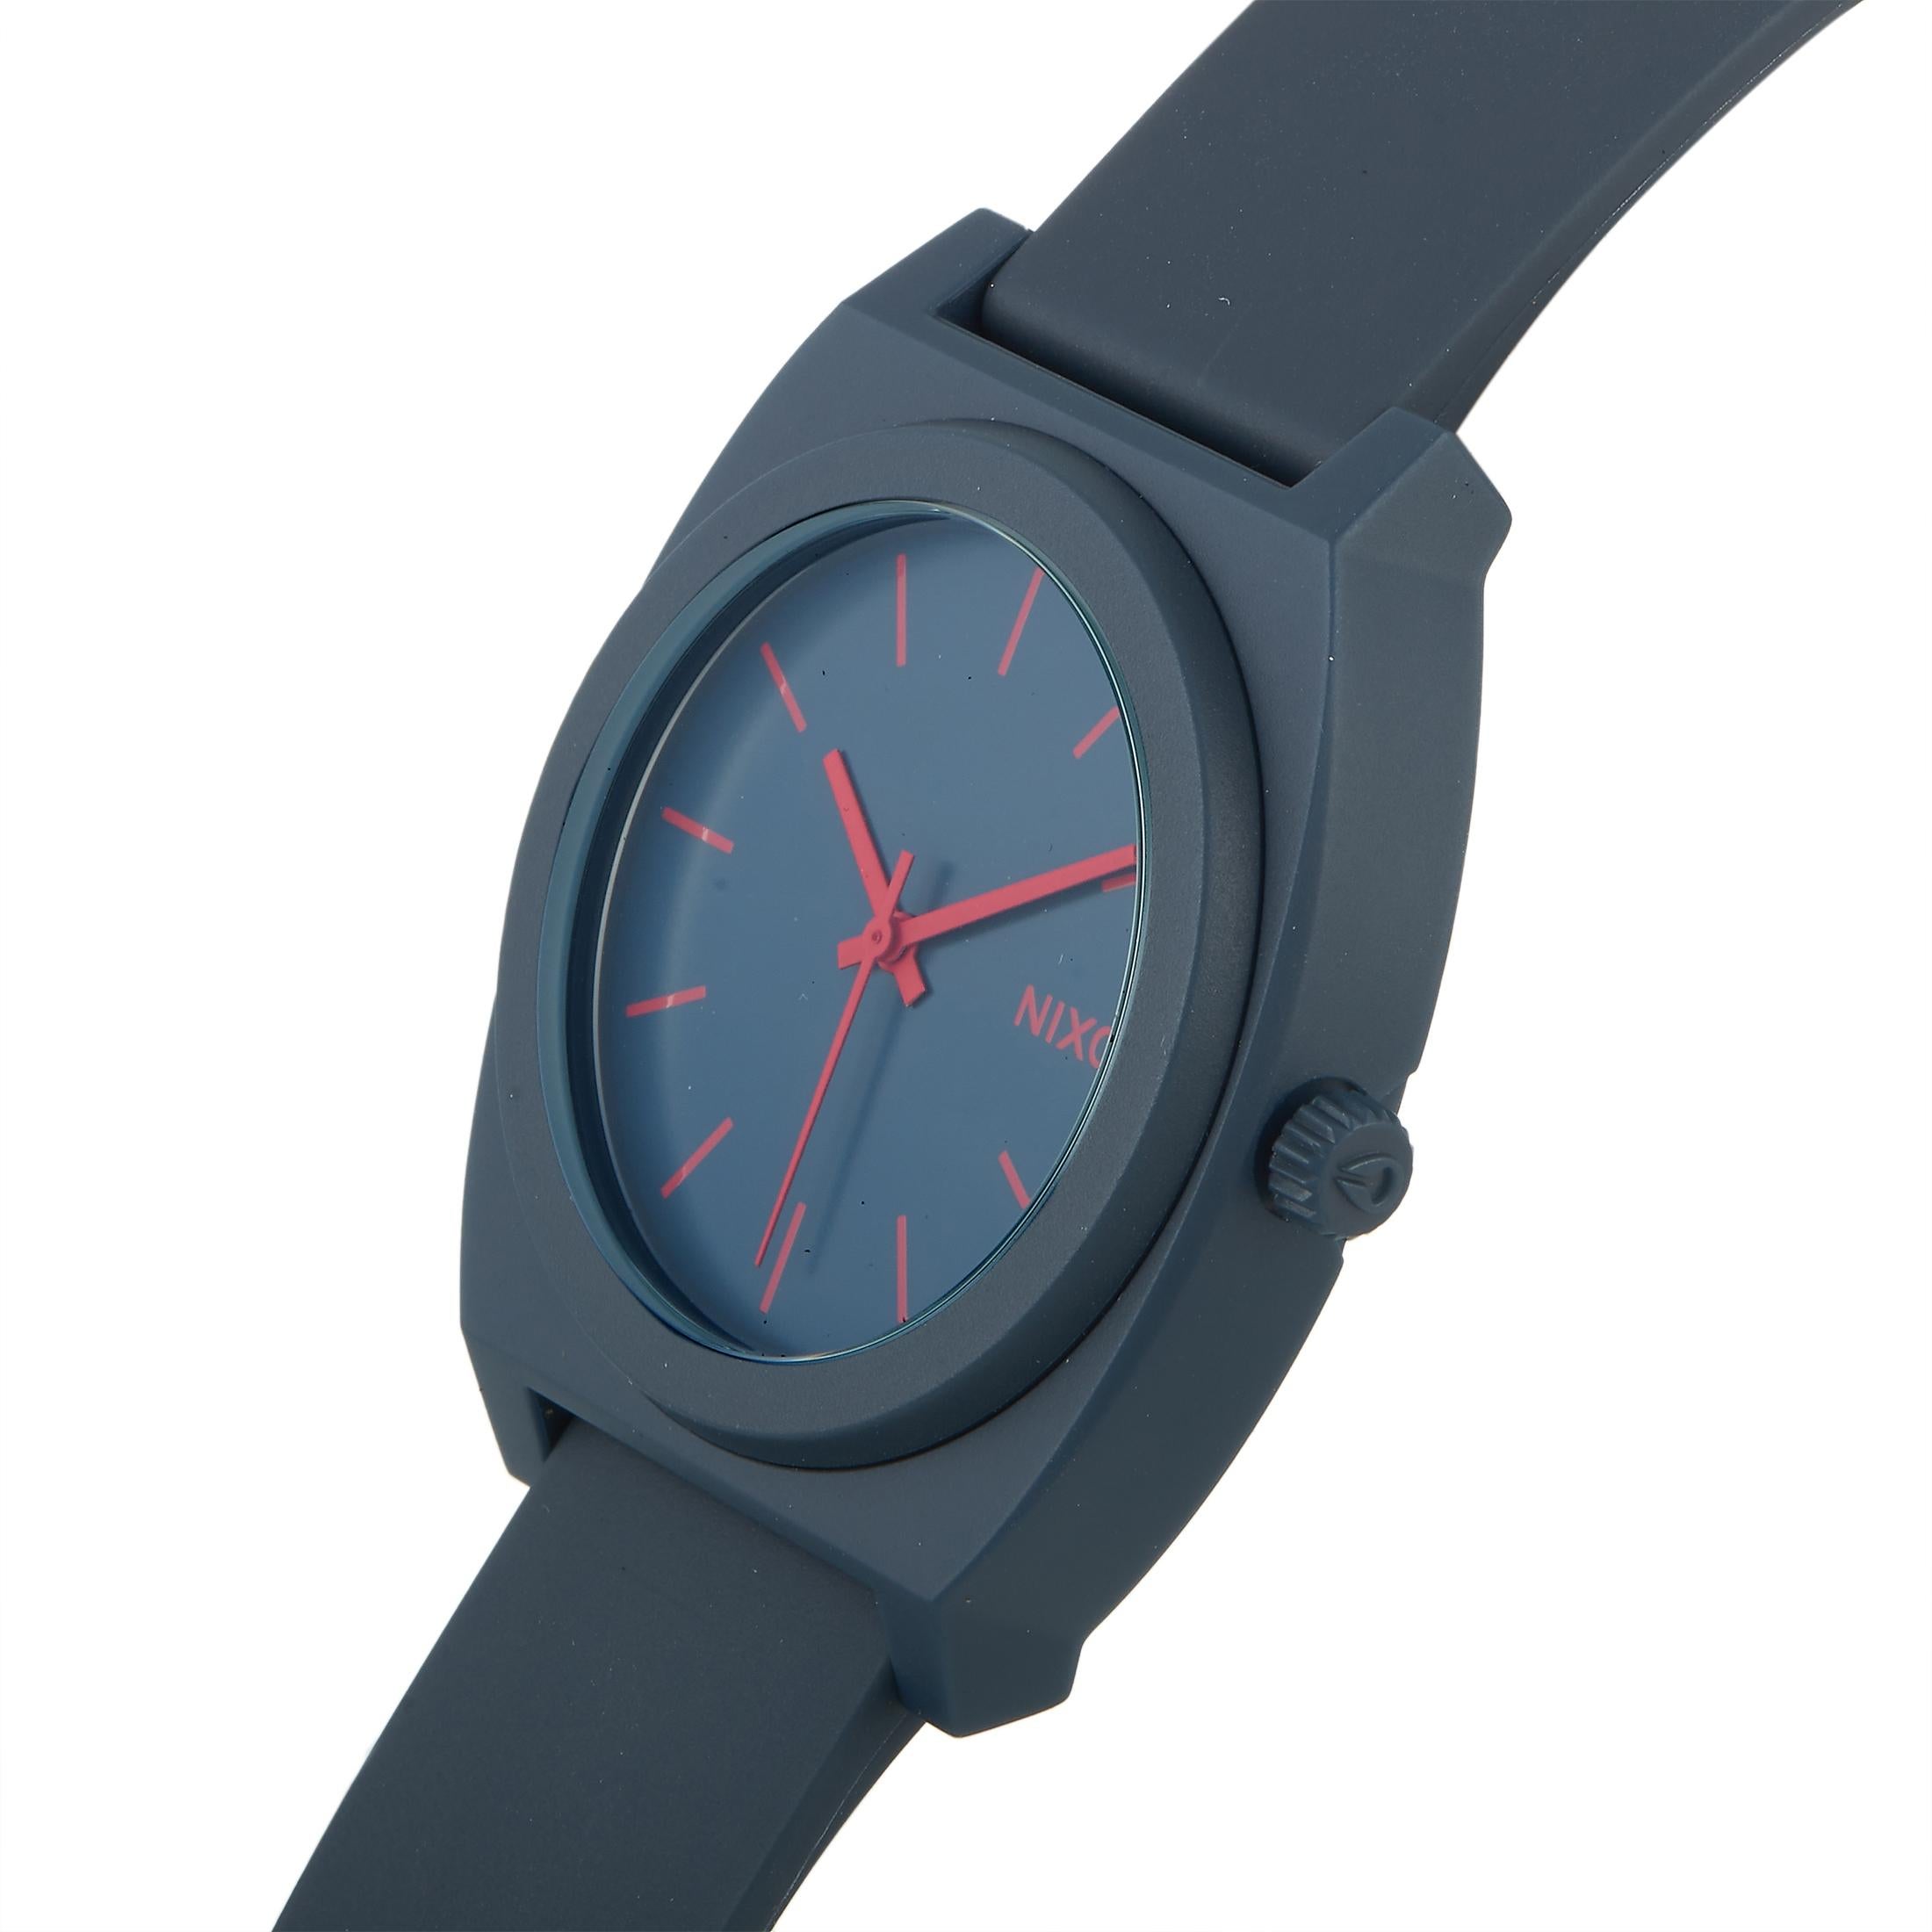 The Nixon Time Teller P Matte Navy watch, reference number A119-692-00, comes with a 40 mm case made of molded polycarbonate. The case is presented on a navy blue molded polyurethane strap fitted with a tang buckle. This timepiece is equipped with a